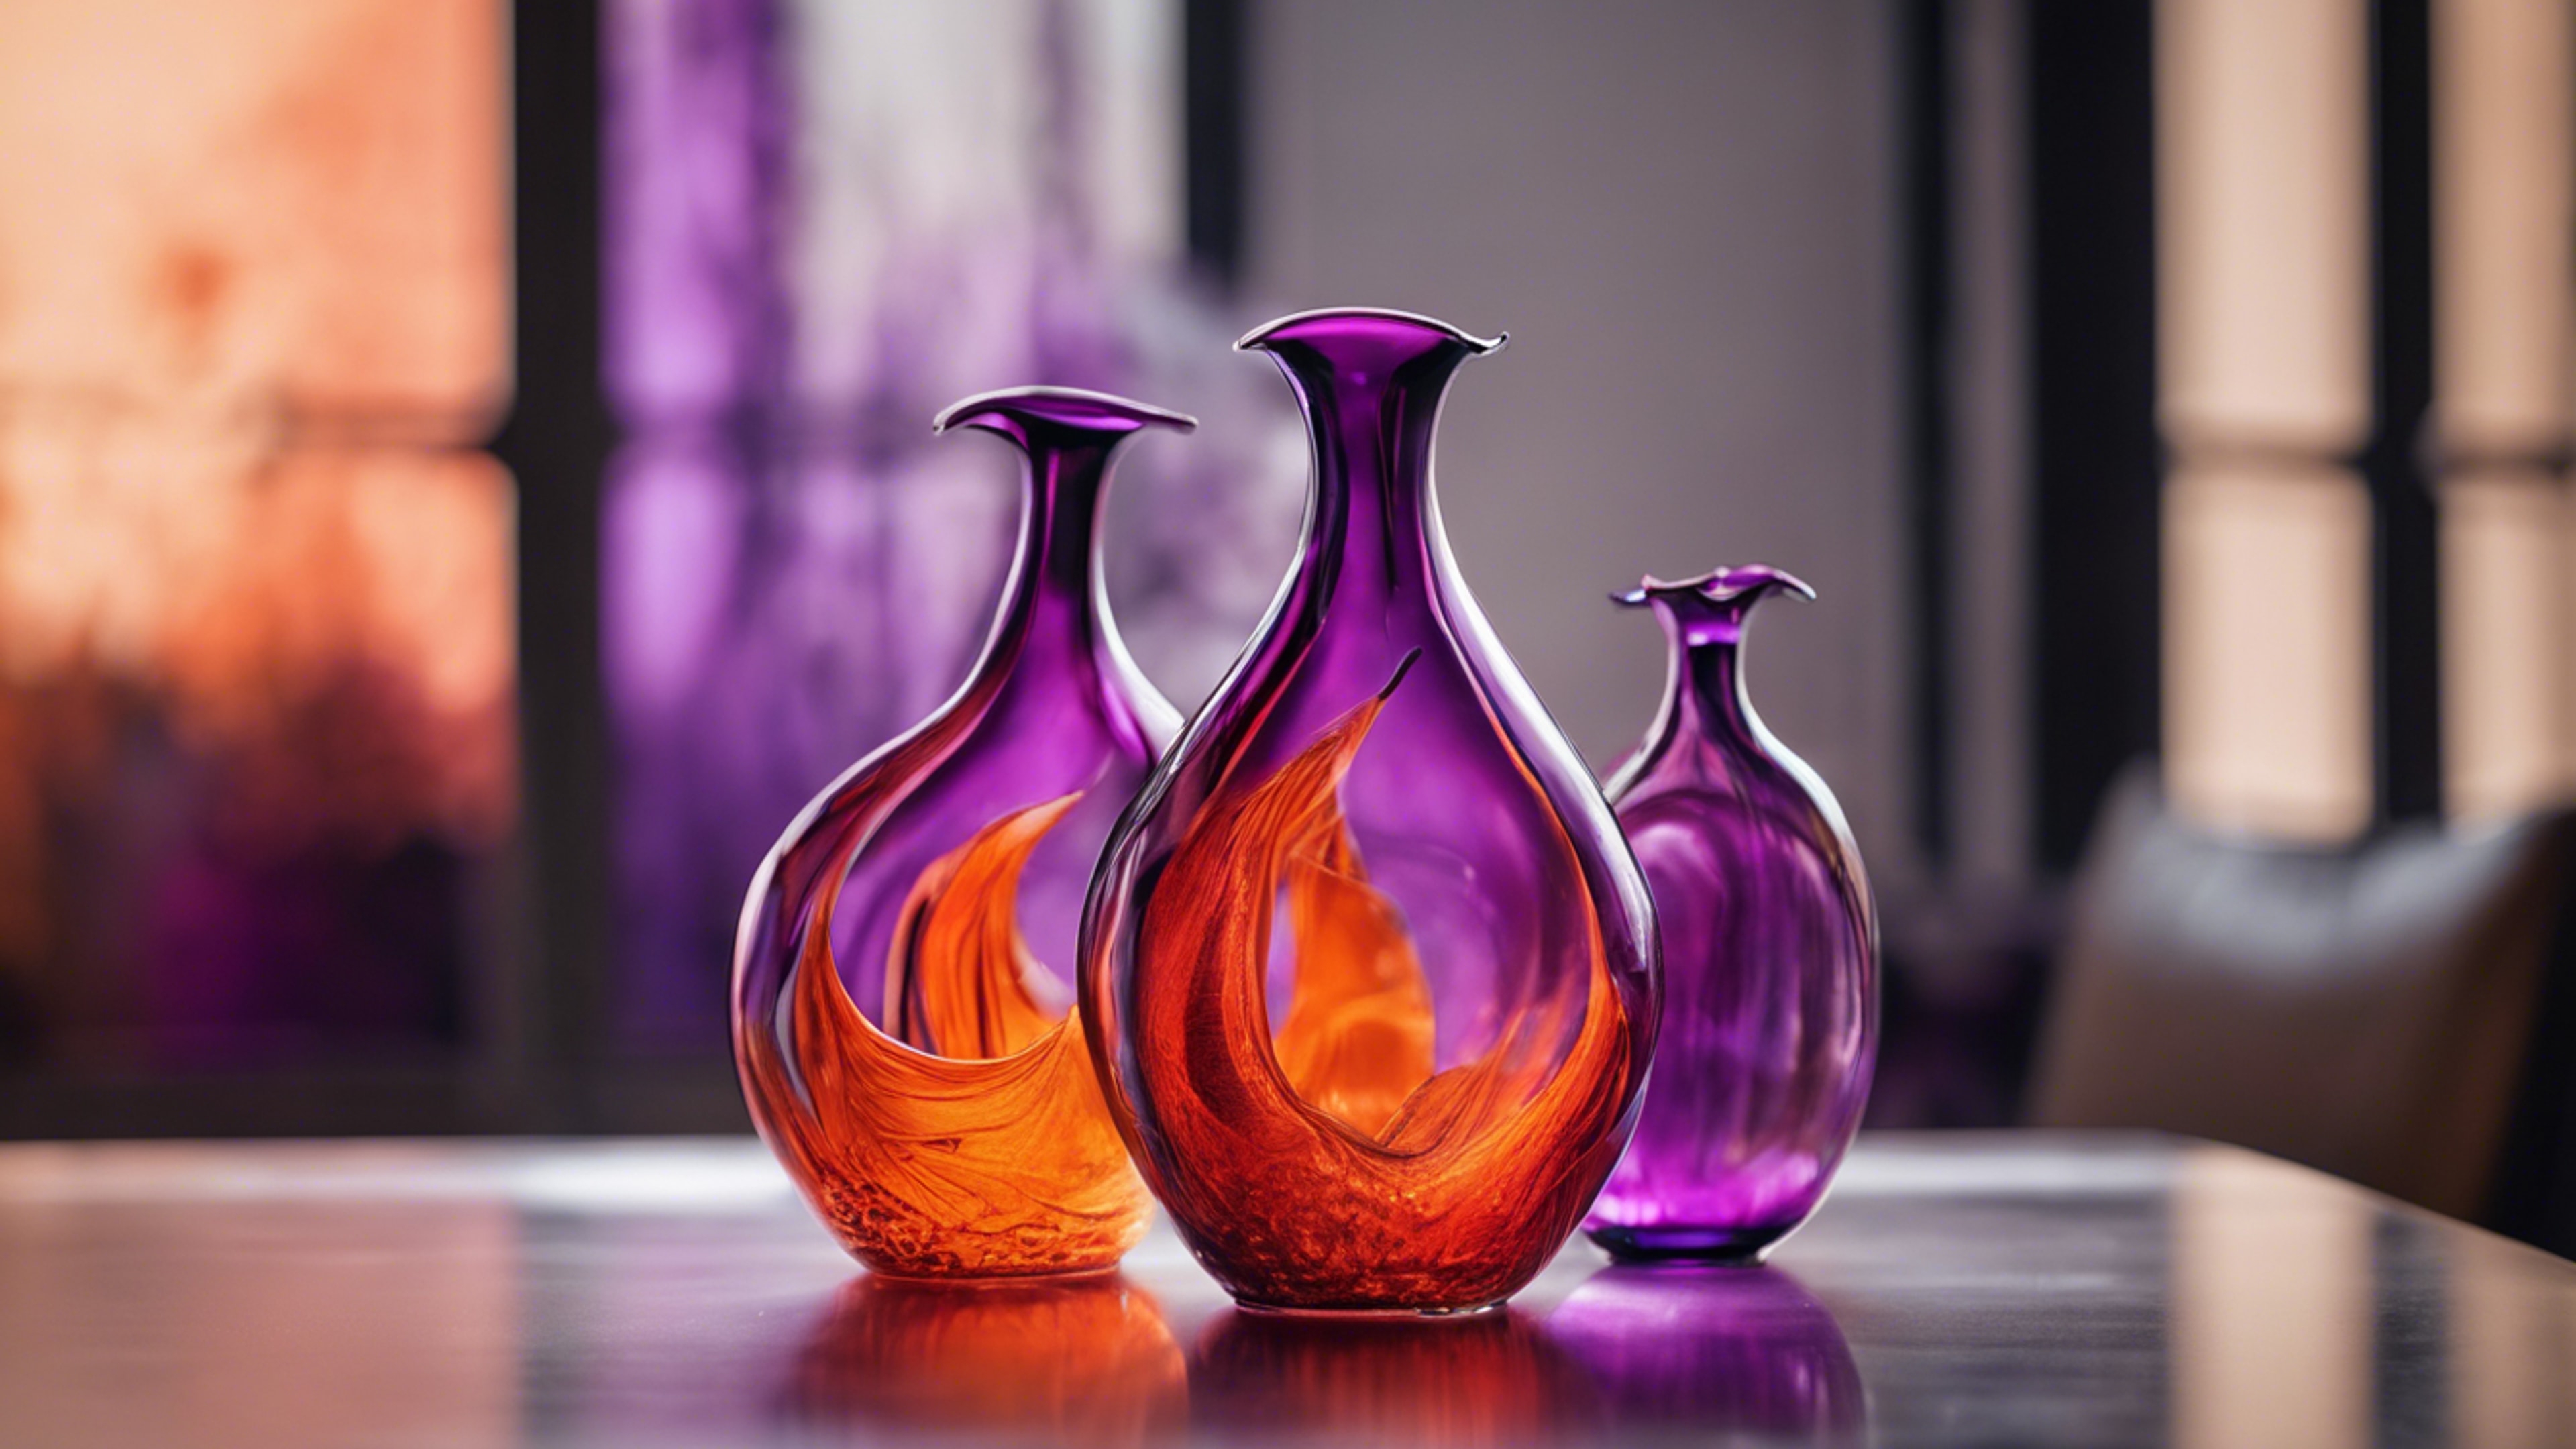 Two exquisitely hand-blown glass vases, one in cool purple and the other in fiery orange.壁紙[4d64cda1737041128688]